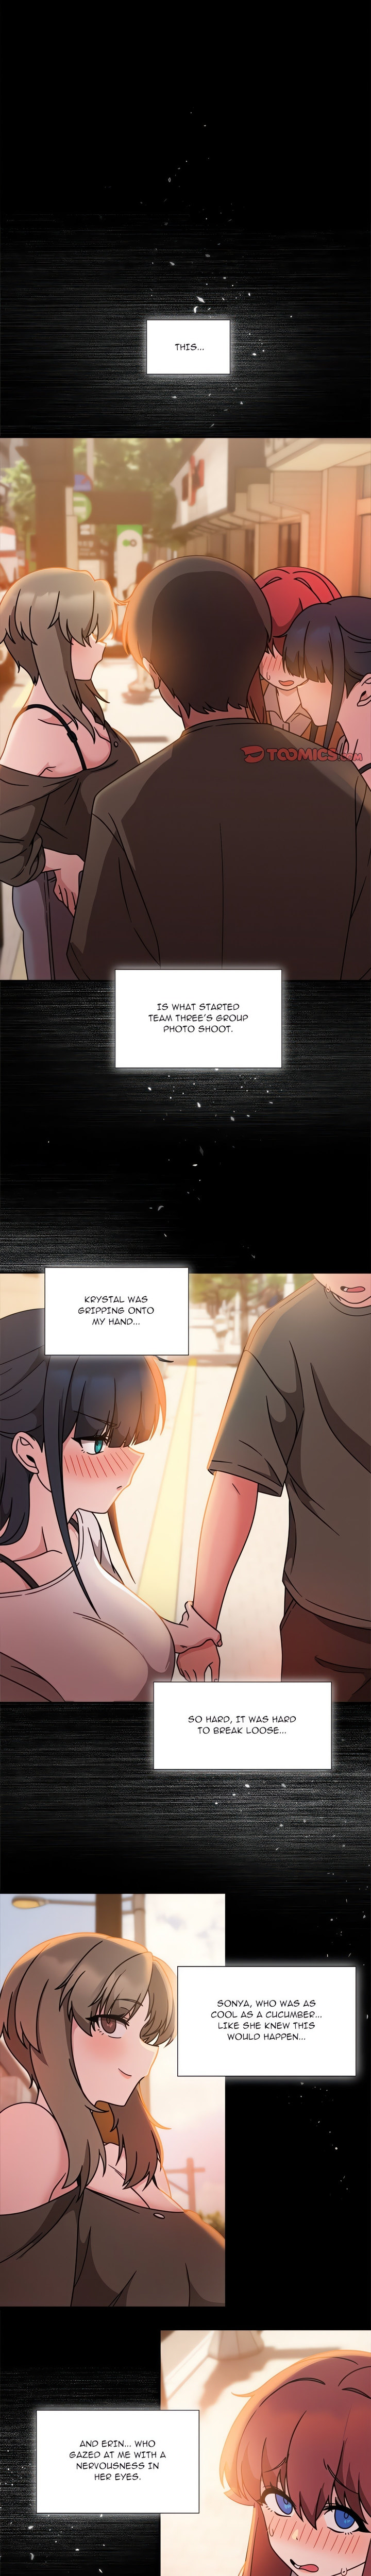 #Follow Me Chapter 49 - Page 1